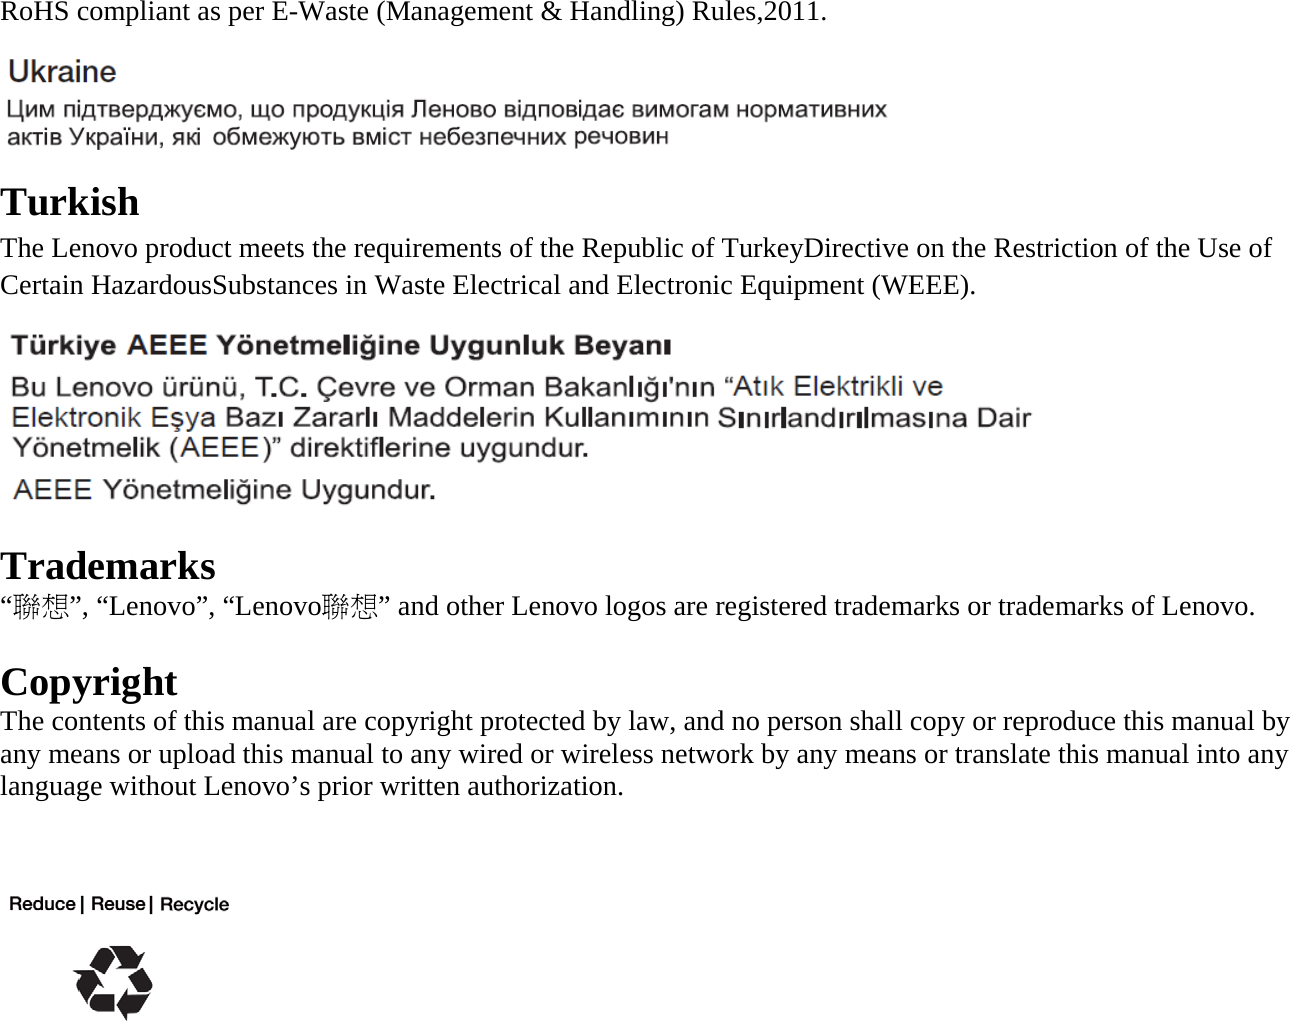 RoHS compliant as per E-Waste (Management &amp; Handling) Rules,2011.  Turkish The Lenovo product meets the requirements of the Republic of TurkeyDirective on the Restriction of the Use of Certain HazardousSubstances in Waste Electrical and Electronic Equipment (WEEE). N Trademarks “聯想”, “Lenovo”, “Lenovo聯想” and other Lenovo logos are registered trademarks or trademarks of Lenovo.  Copyright The contents of this manual are copyright protected by law, and no person shall copy or reproduce this manual by any means or upload this manual to any wired or wireless network by any means or translate this manual into any language without Lenovo’s prior written authorization.    